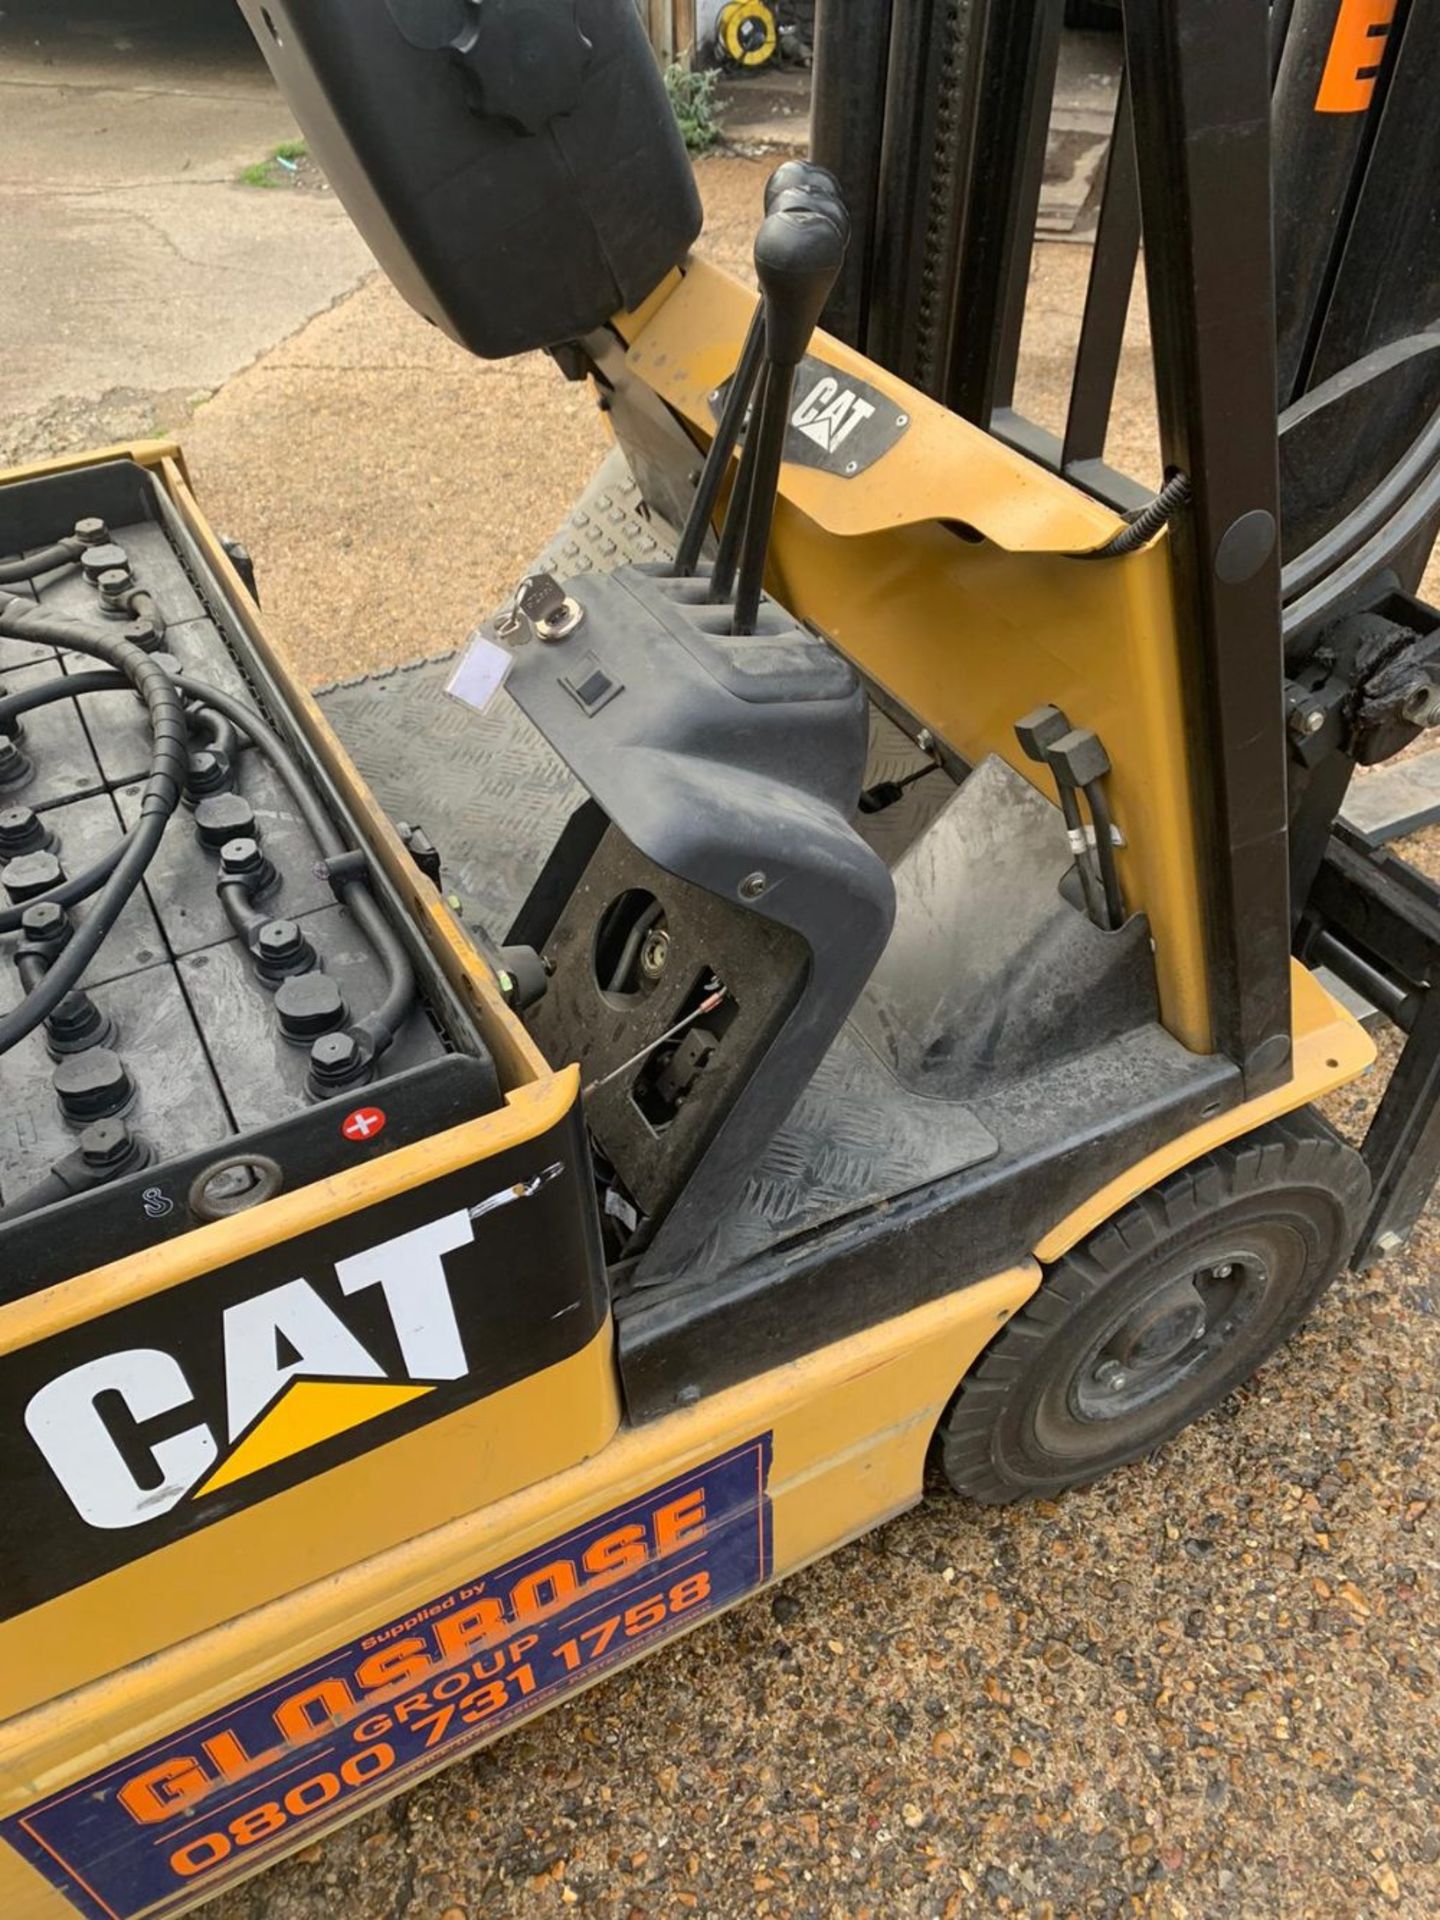 CATERPILLAR EP12KRT-PAC BATTERY FORKLIFT TRUCK, YEAR 2016 BUILD. 1.2 TONNE RATED. WHEN TESTED WAS S - Image 10 of 17